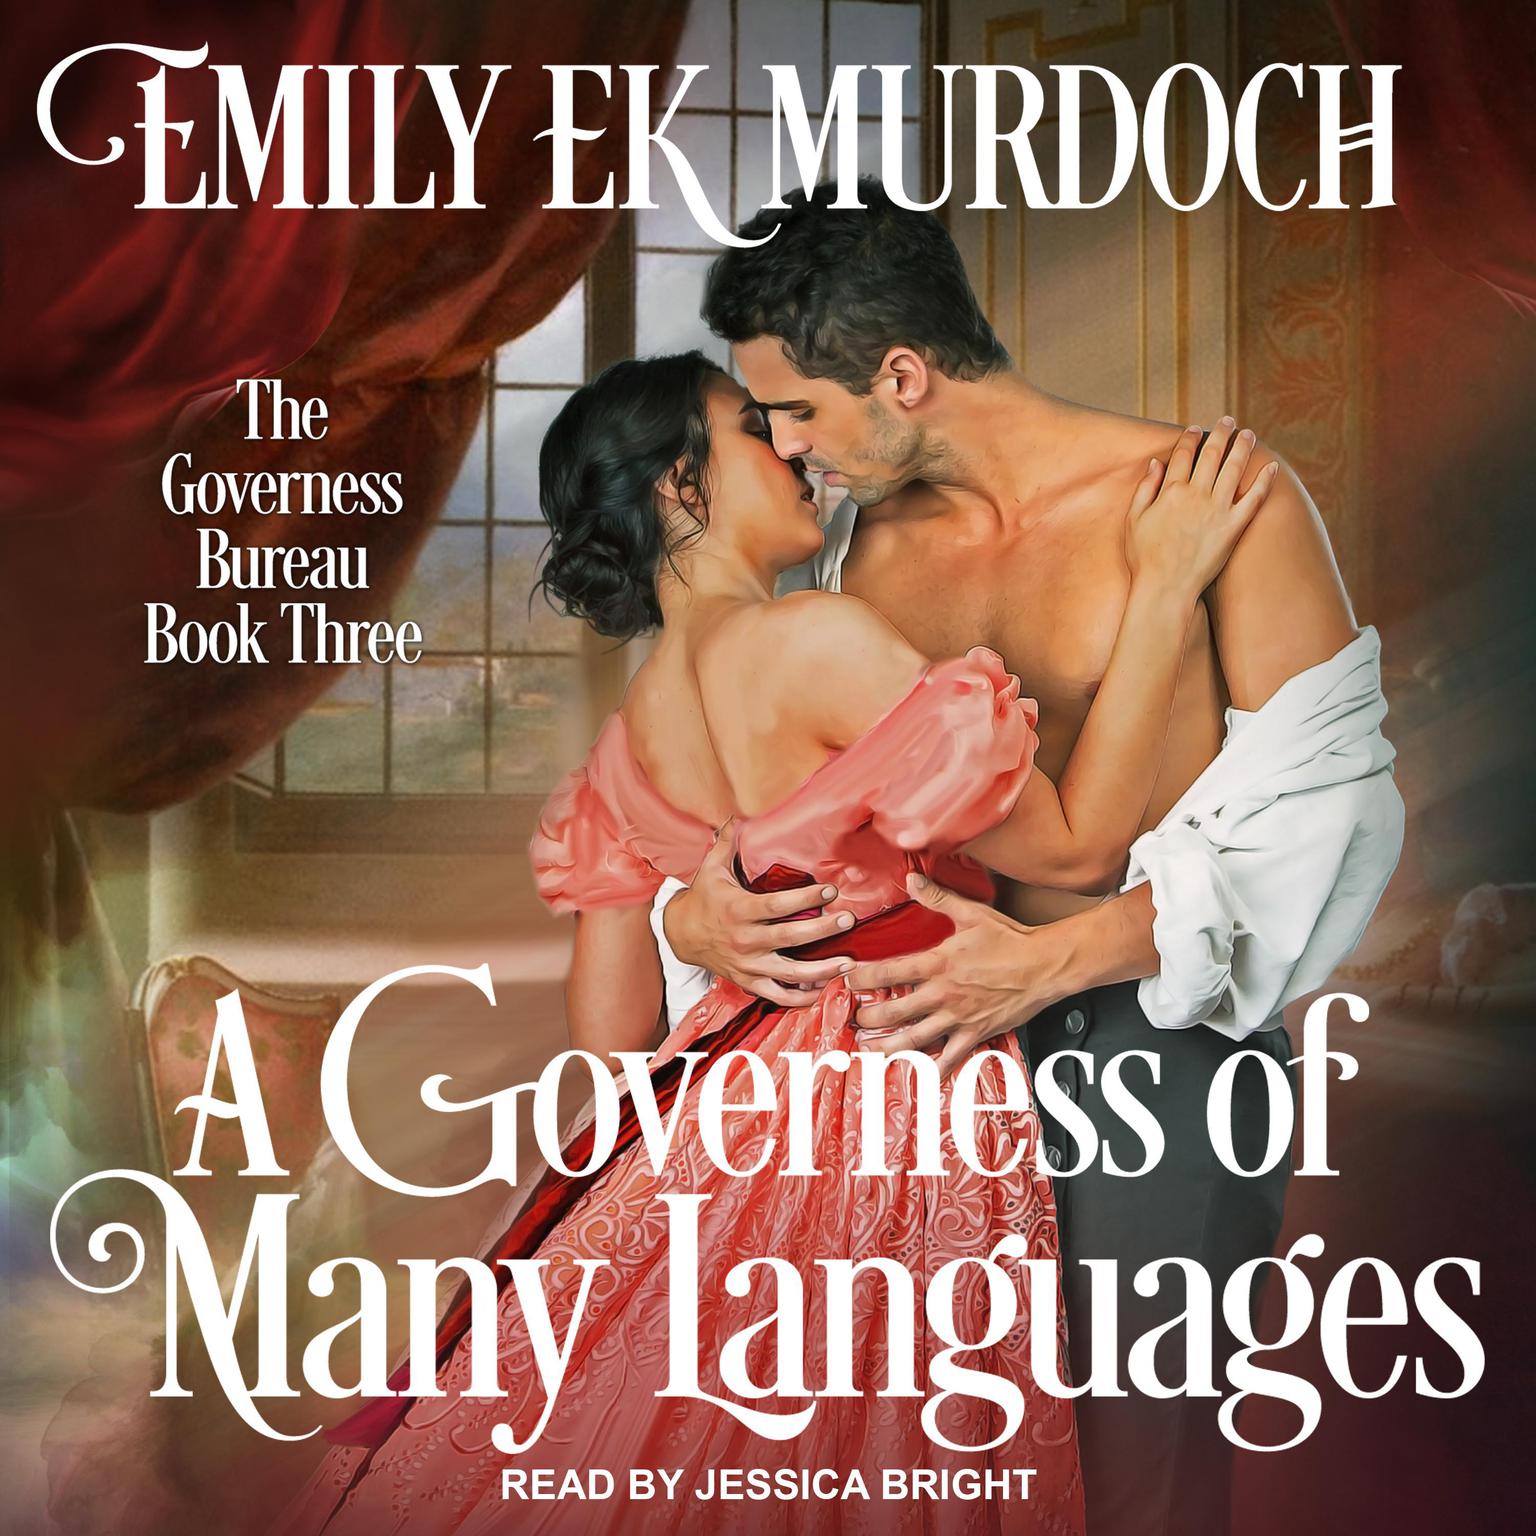 A Governess of Many Languages Audiobook, by Emily EK Murdoch